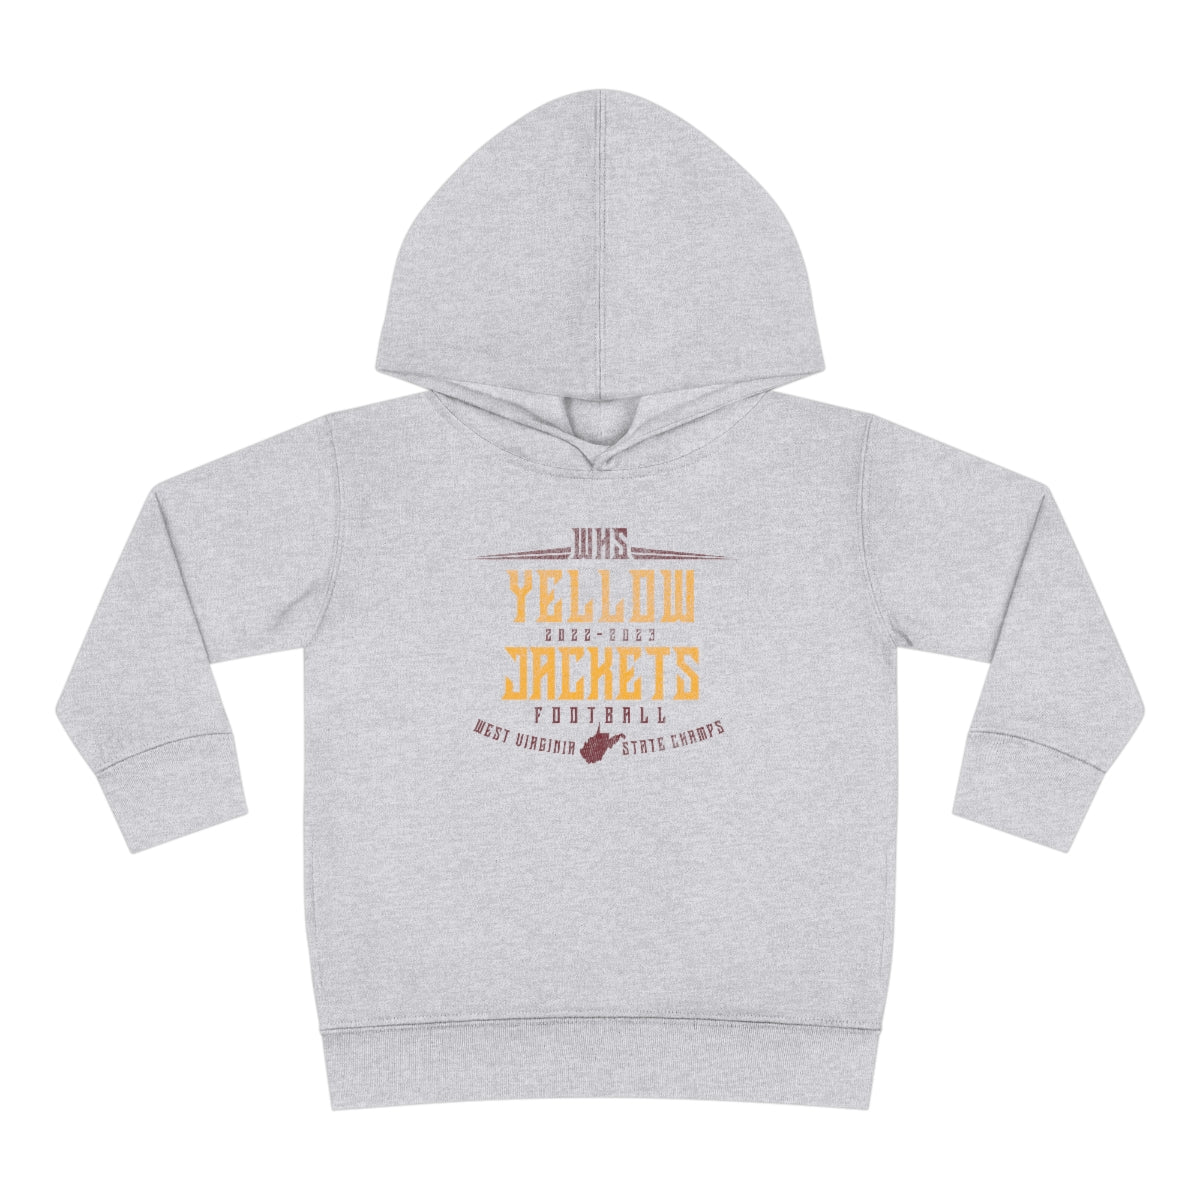 WHS YELLOW JACKETS WV STATE CHAMPS_Toddler Pullover Fleece Hoodie